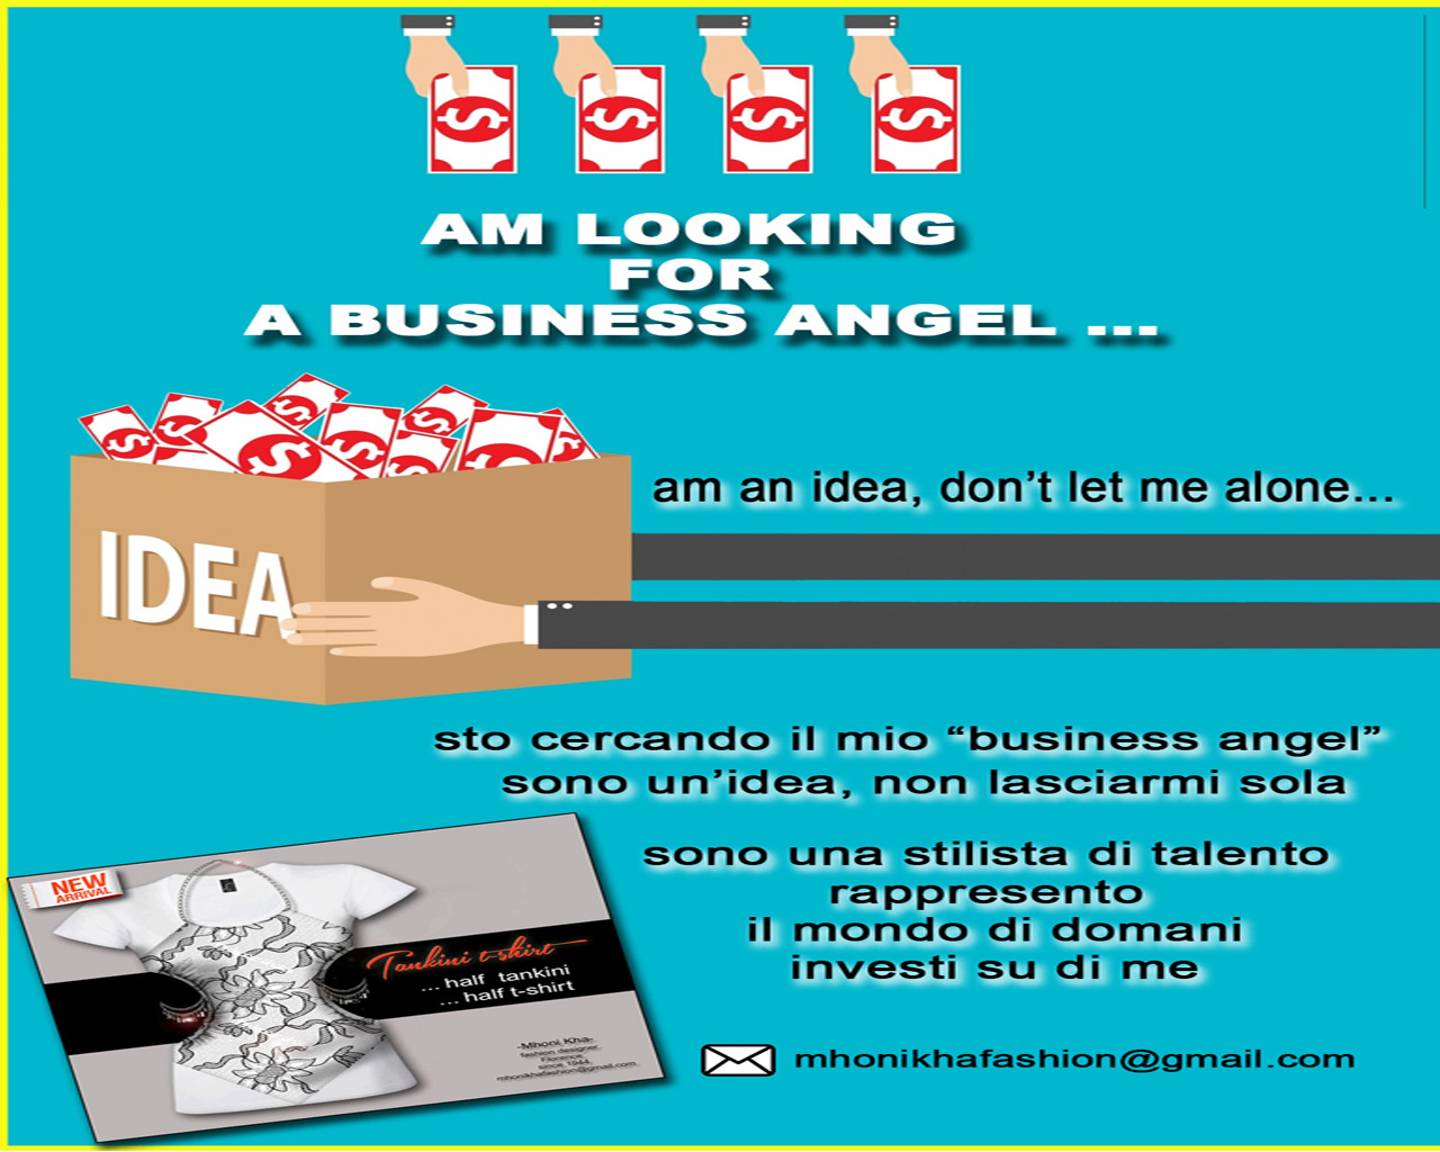 LOOKING FOR A BUSINESS ANGEL...